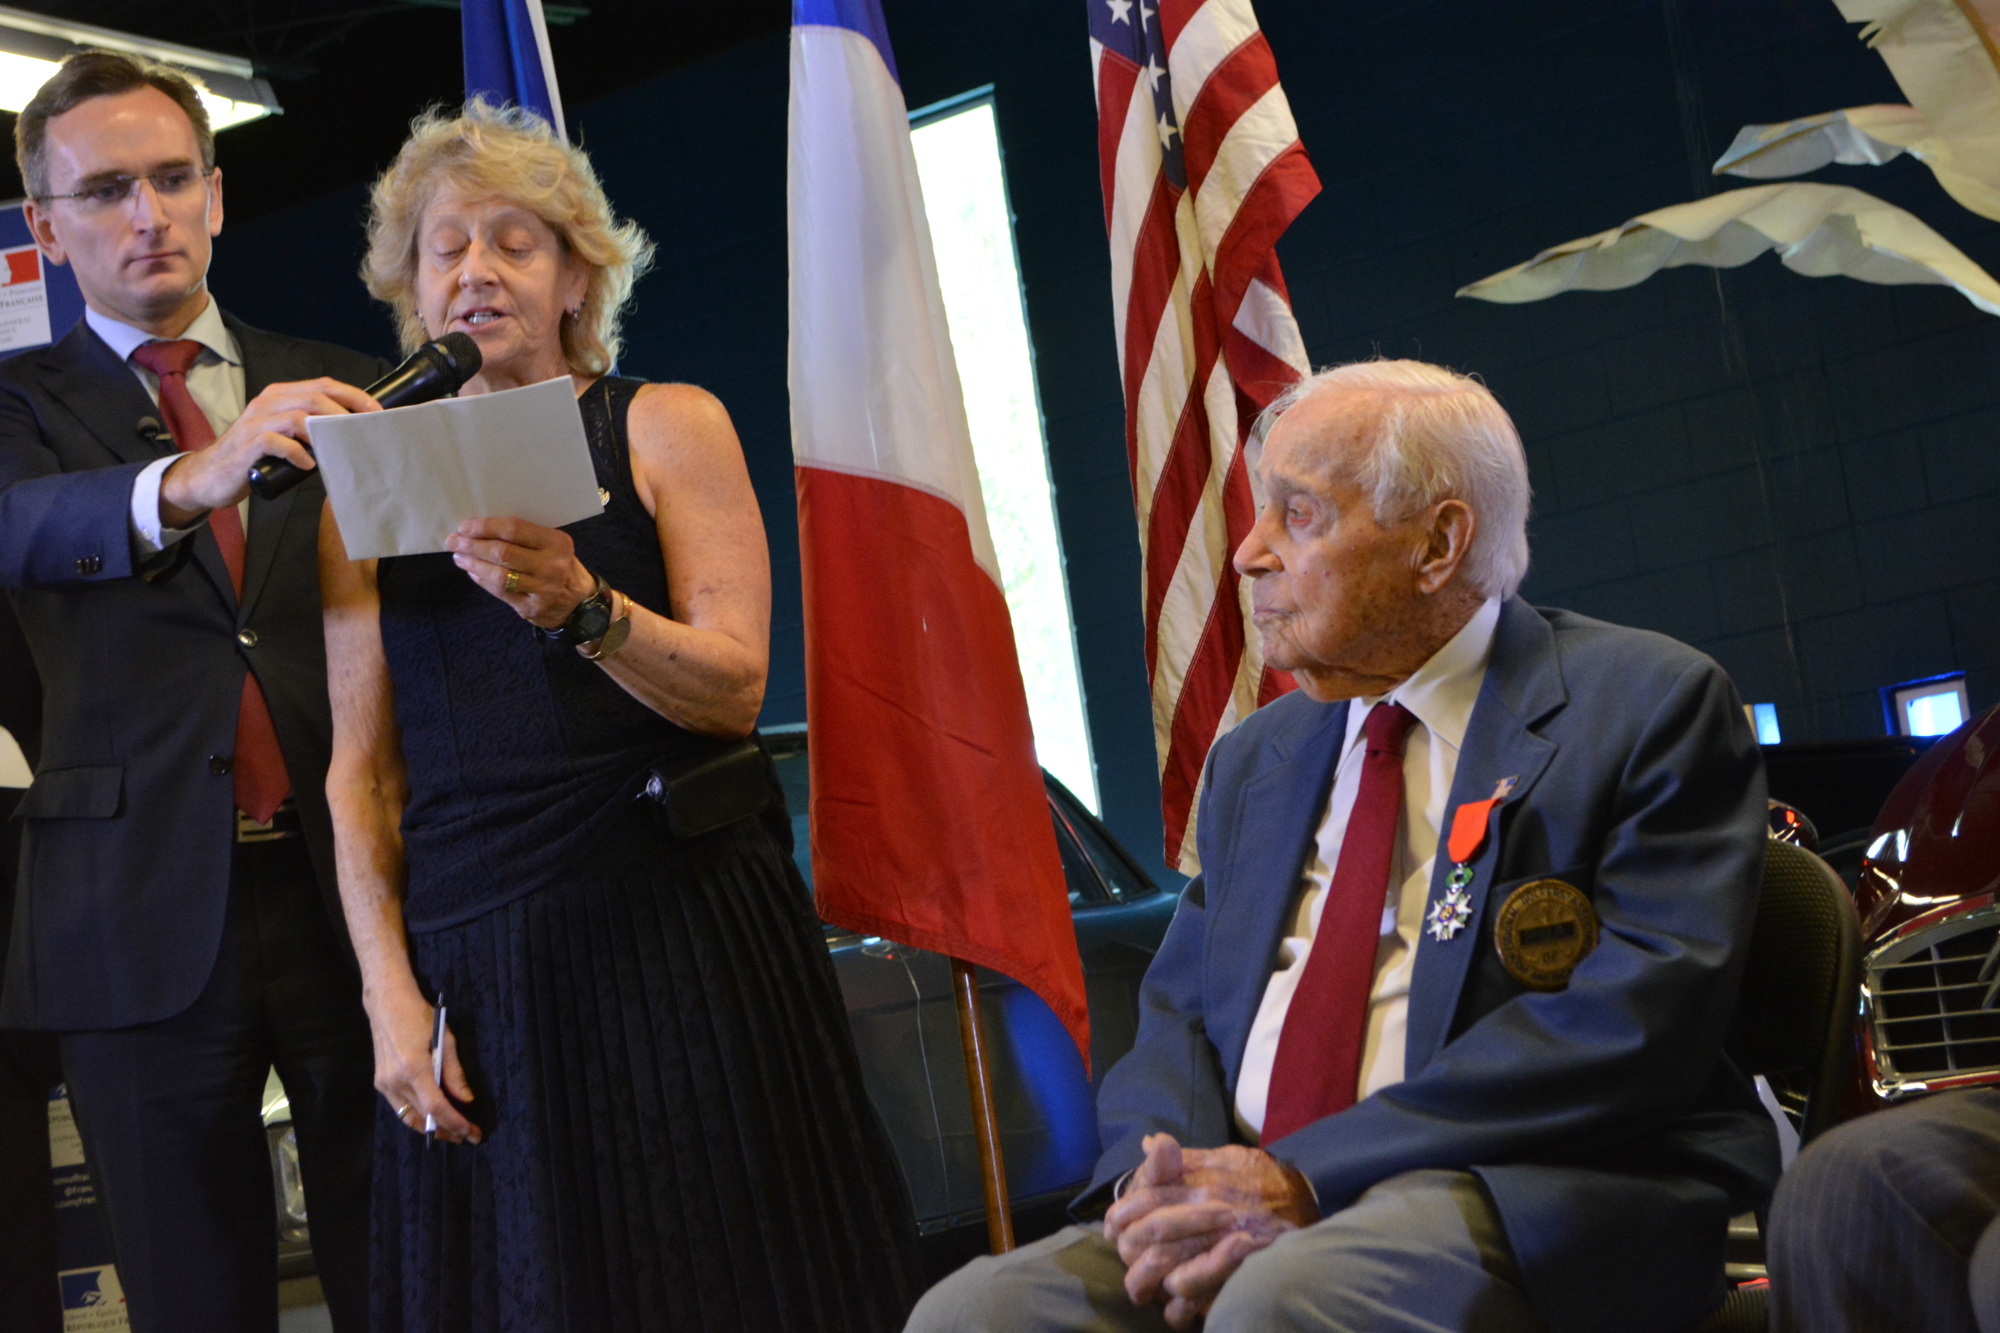 Teresa Andreone, Gus Andreone's niece, reads comments on his behalf during the ceremoney. Andreone, seated, thanked France for the honor and the French people's hospitality during the war.